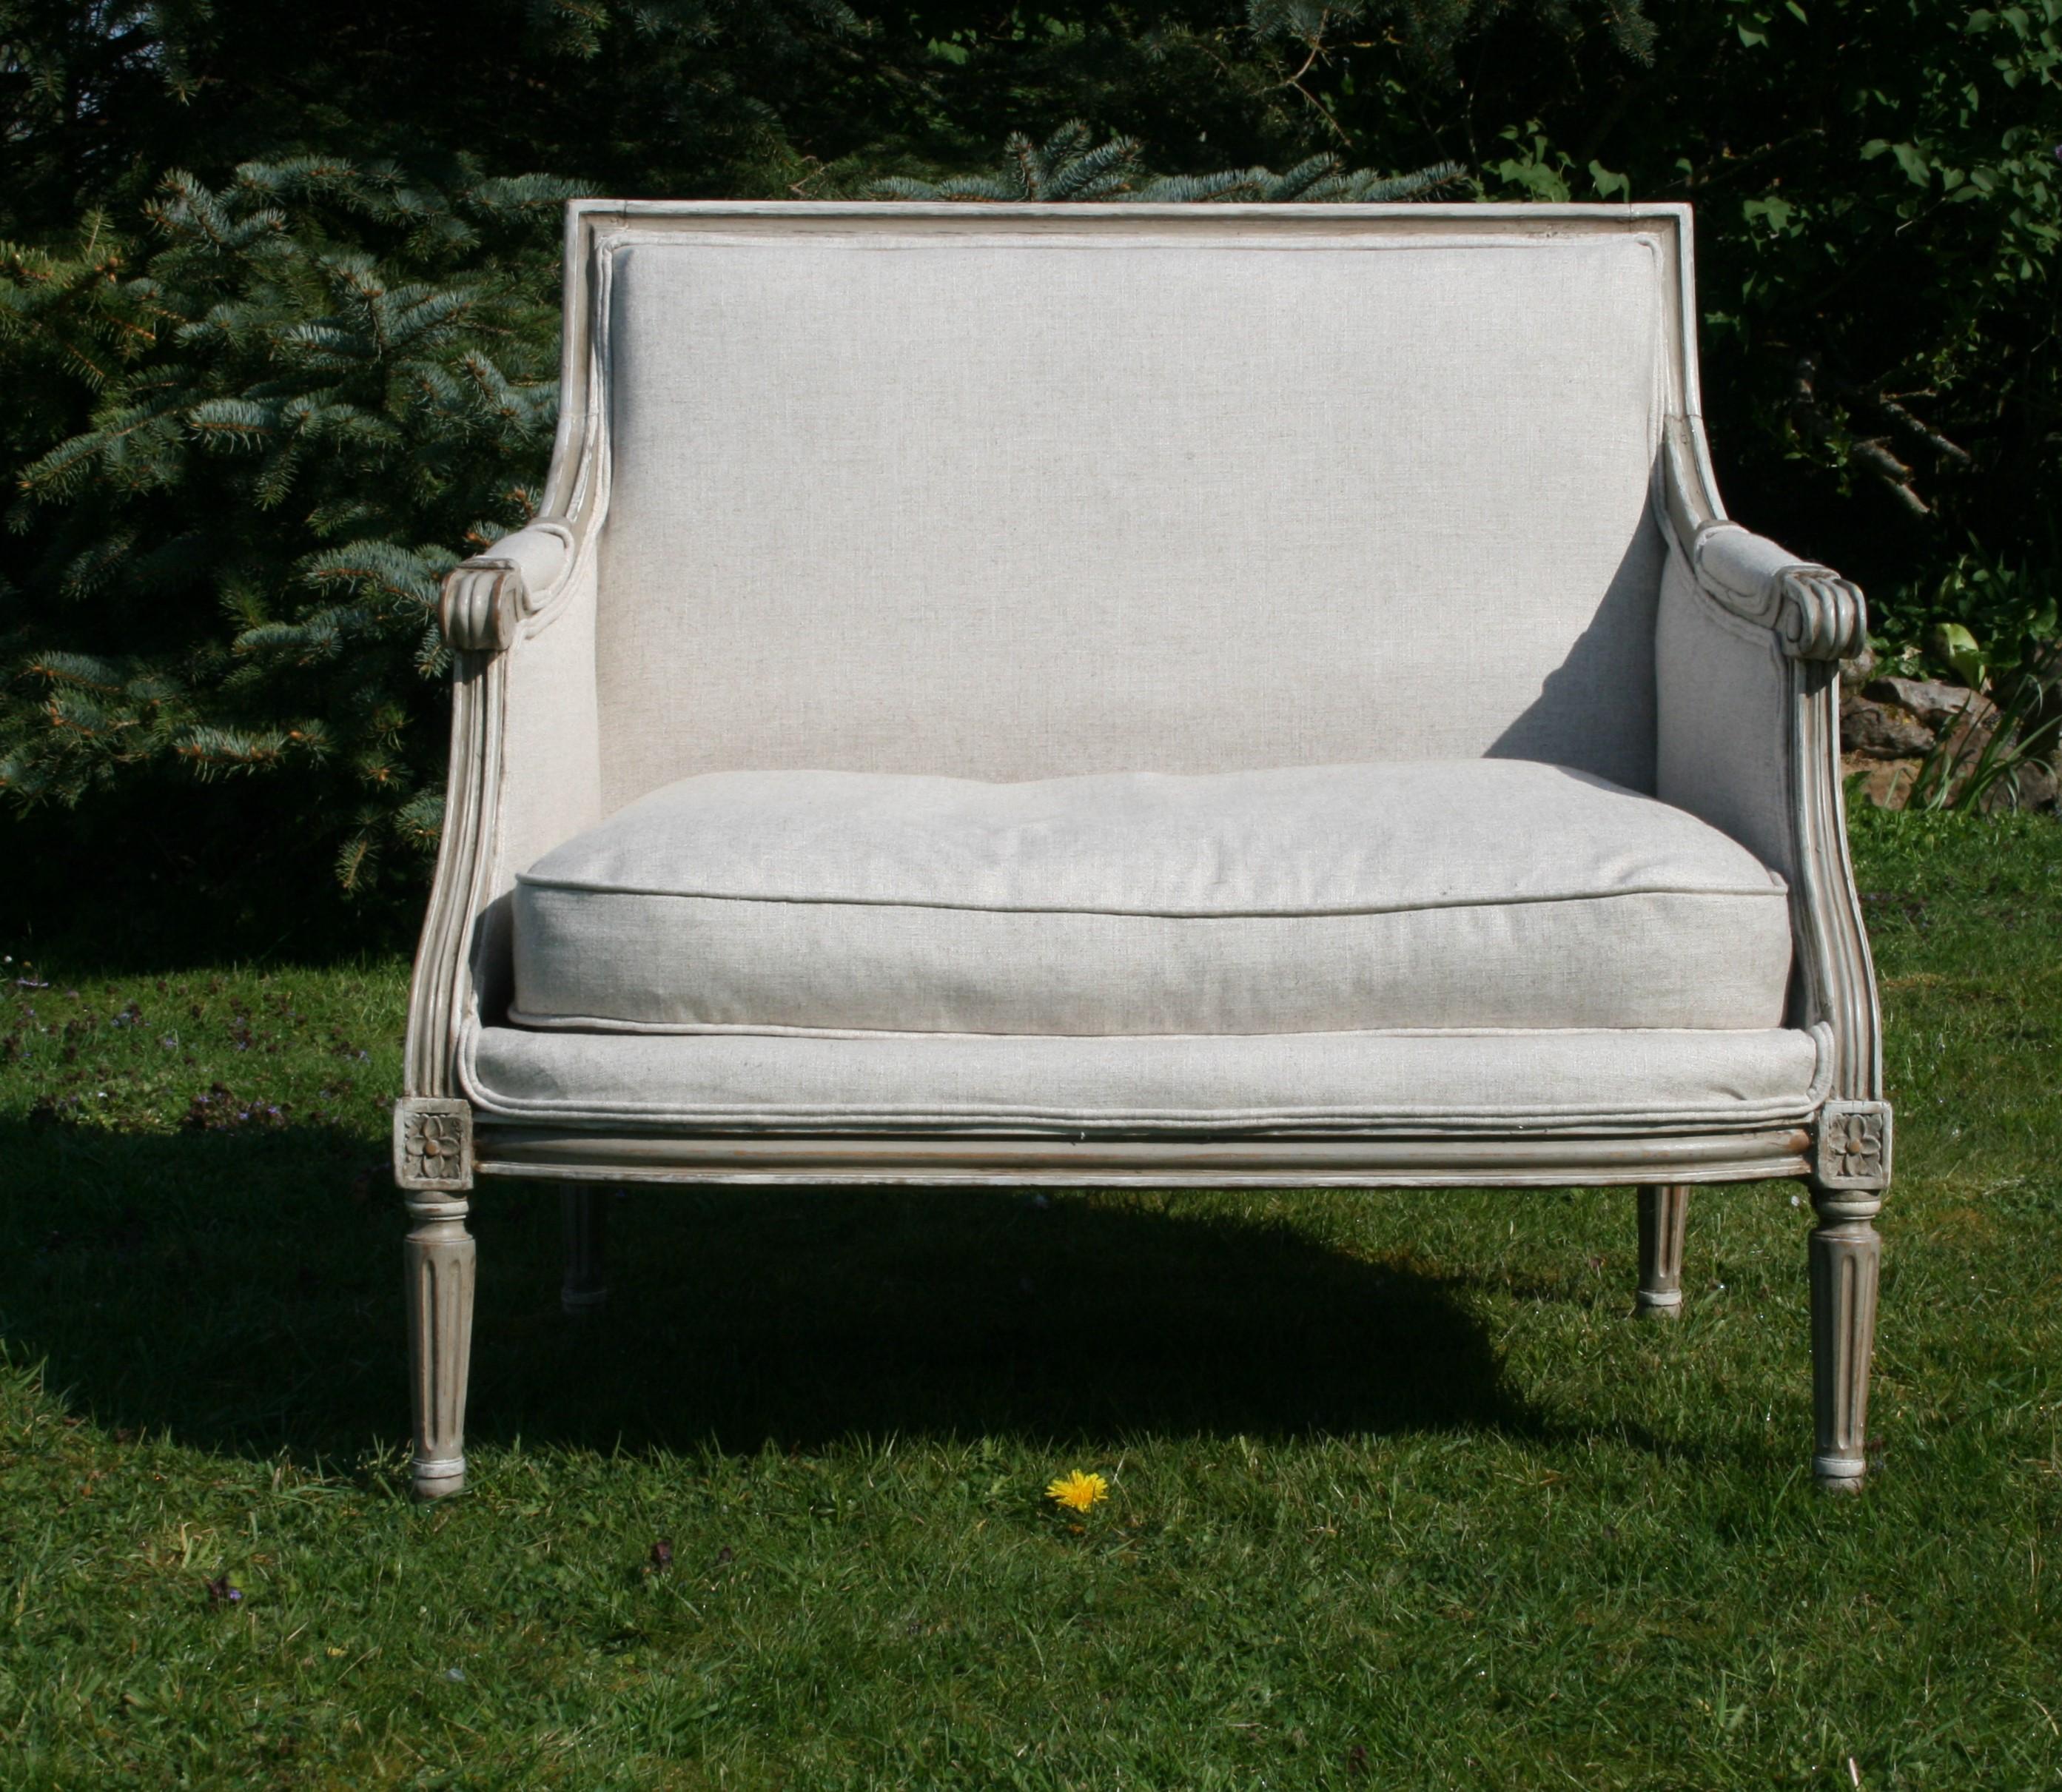 French canapé in later paint finish with new linen fabric and feather cushion.